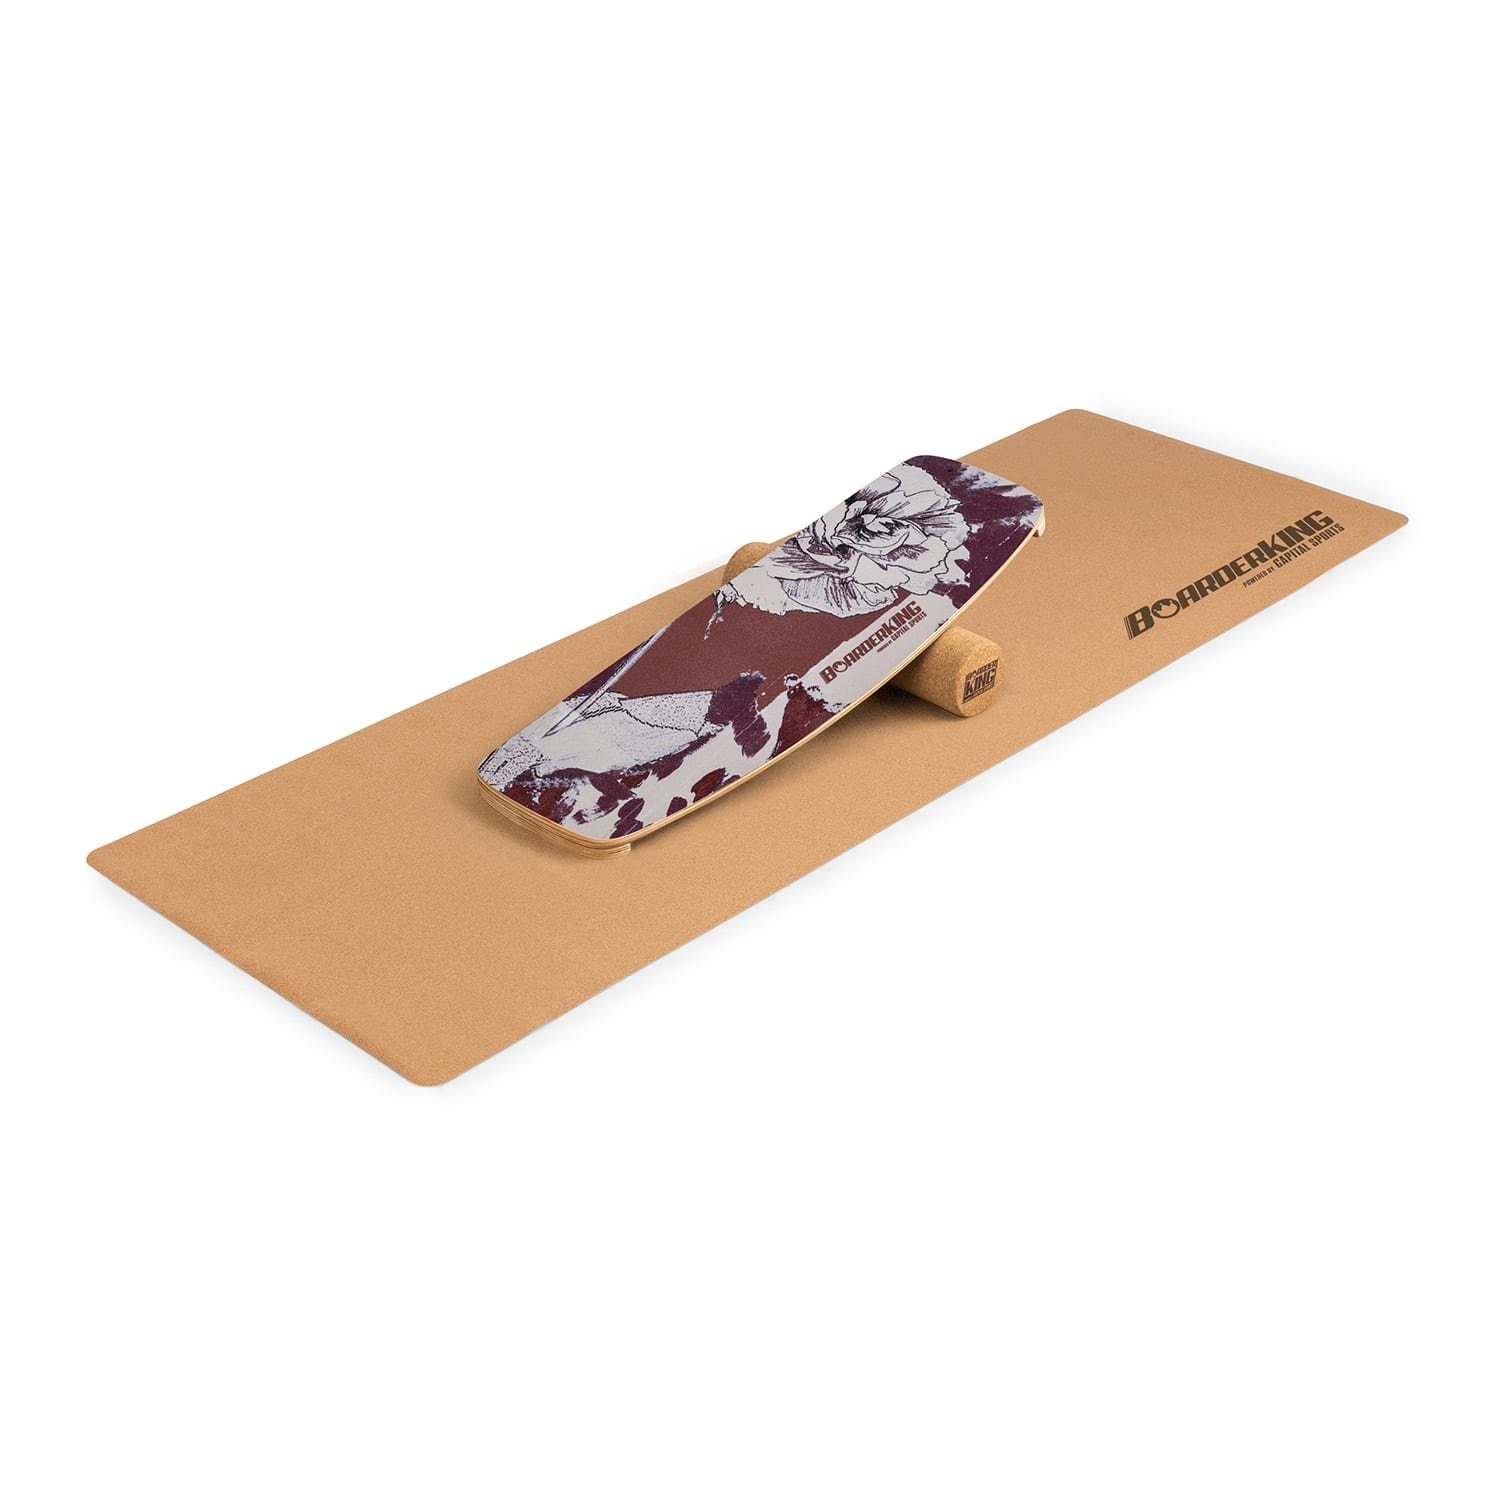 BoarderKING Half Ball Indoorboard Curved Floral